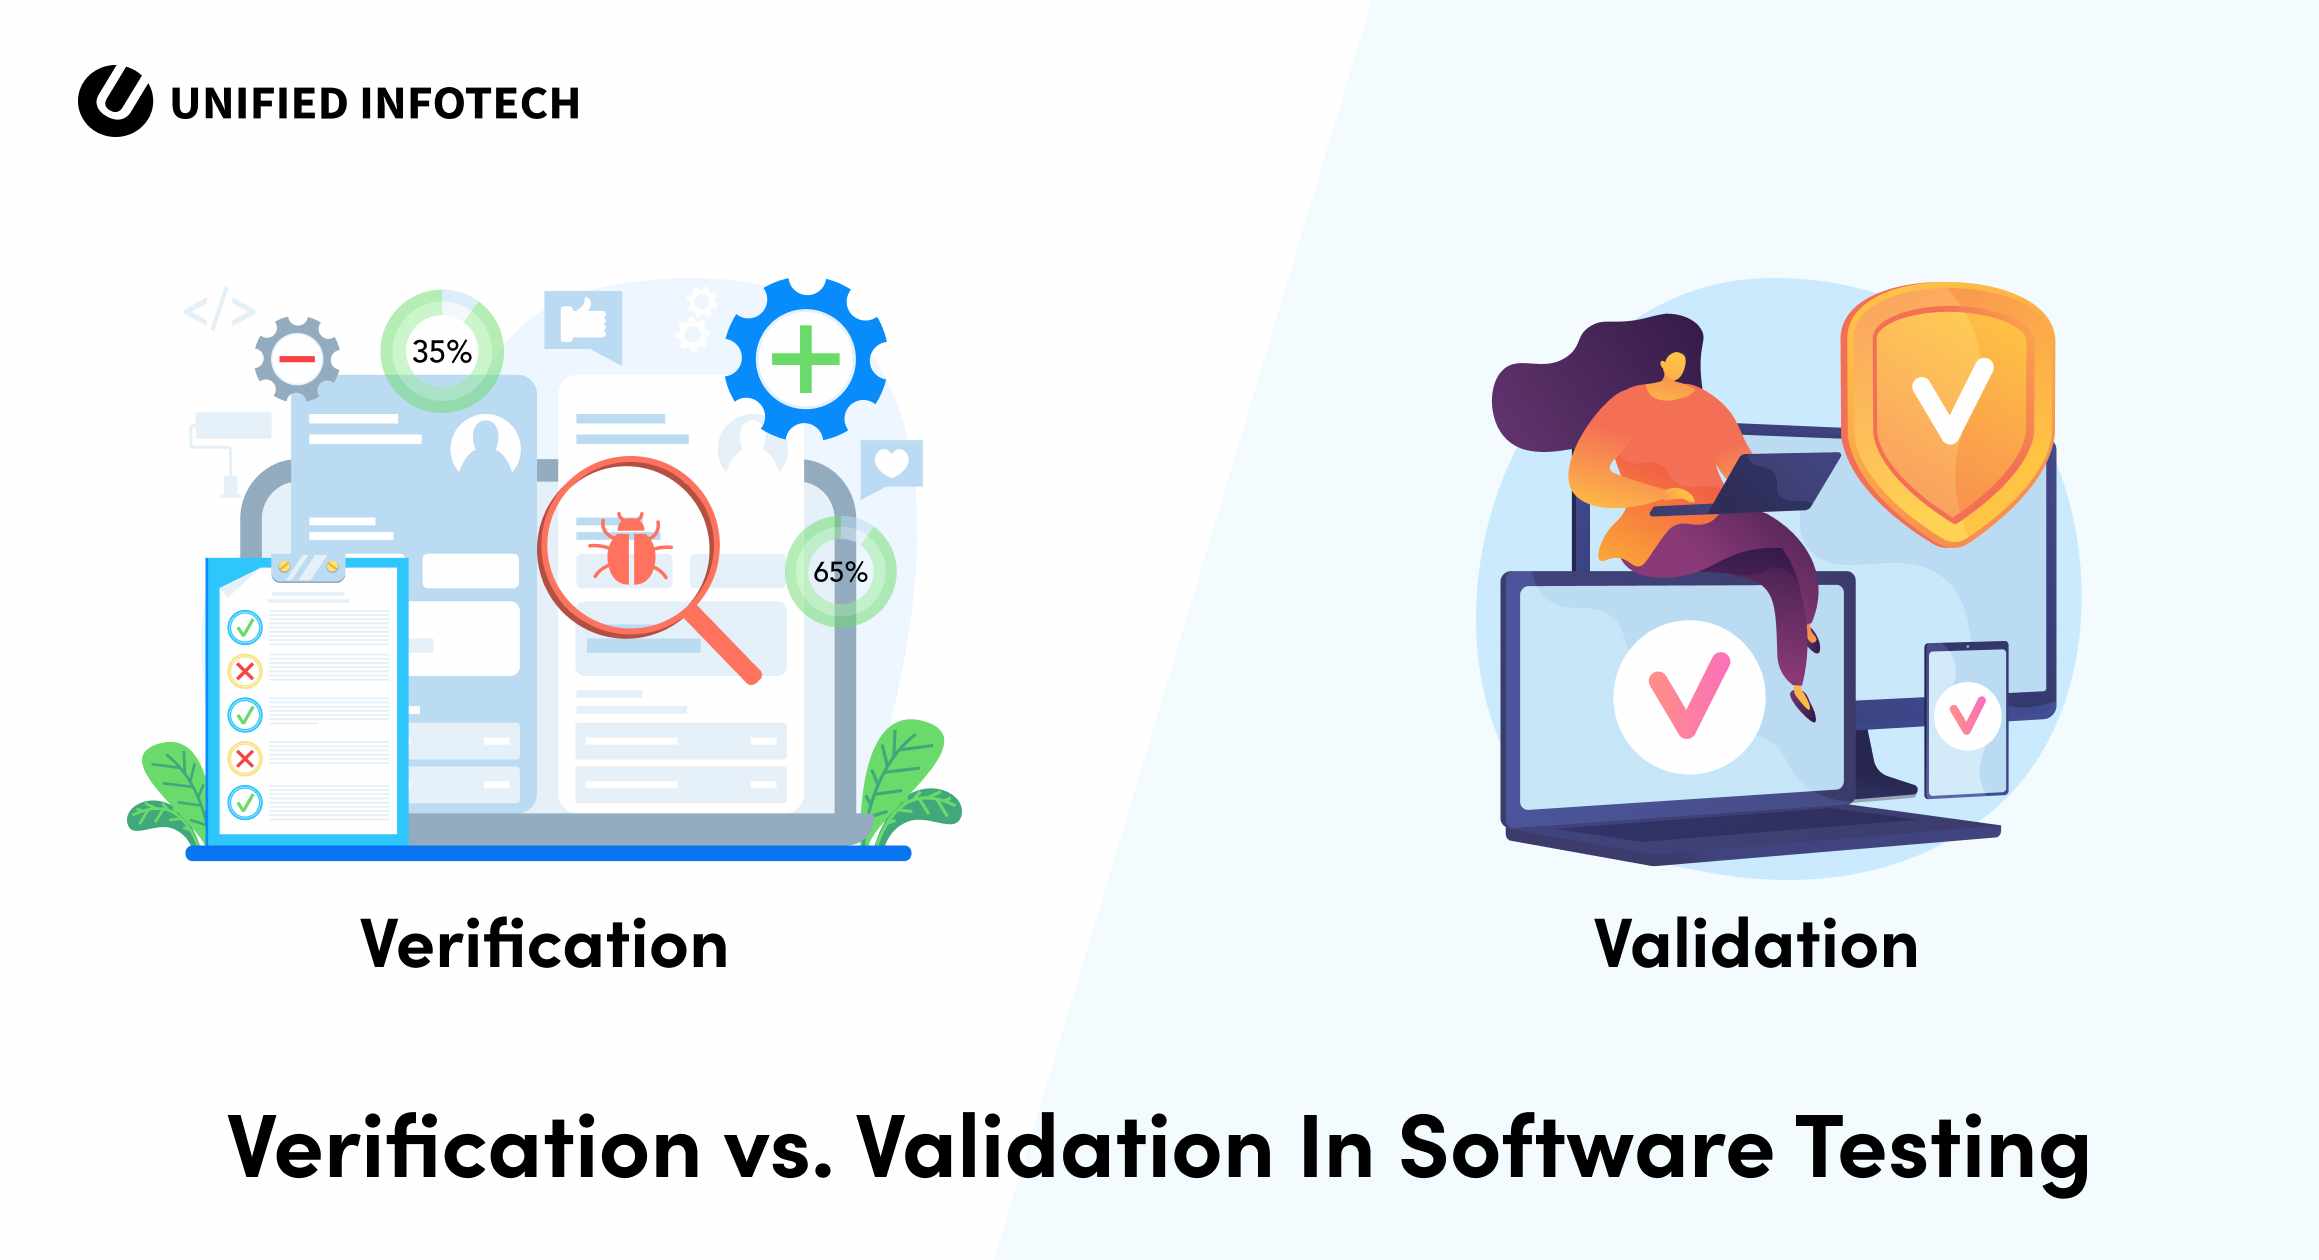 What are Software Verification and Validation Testing?